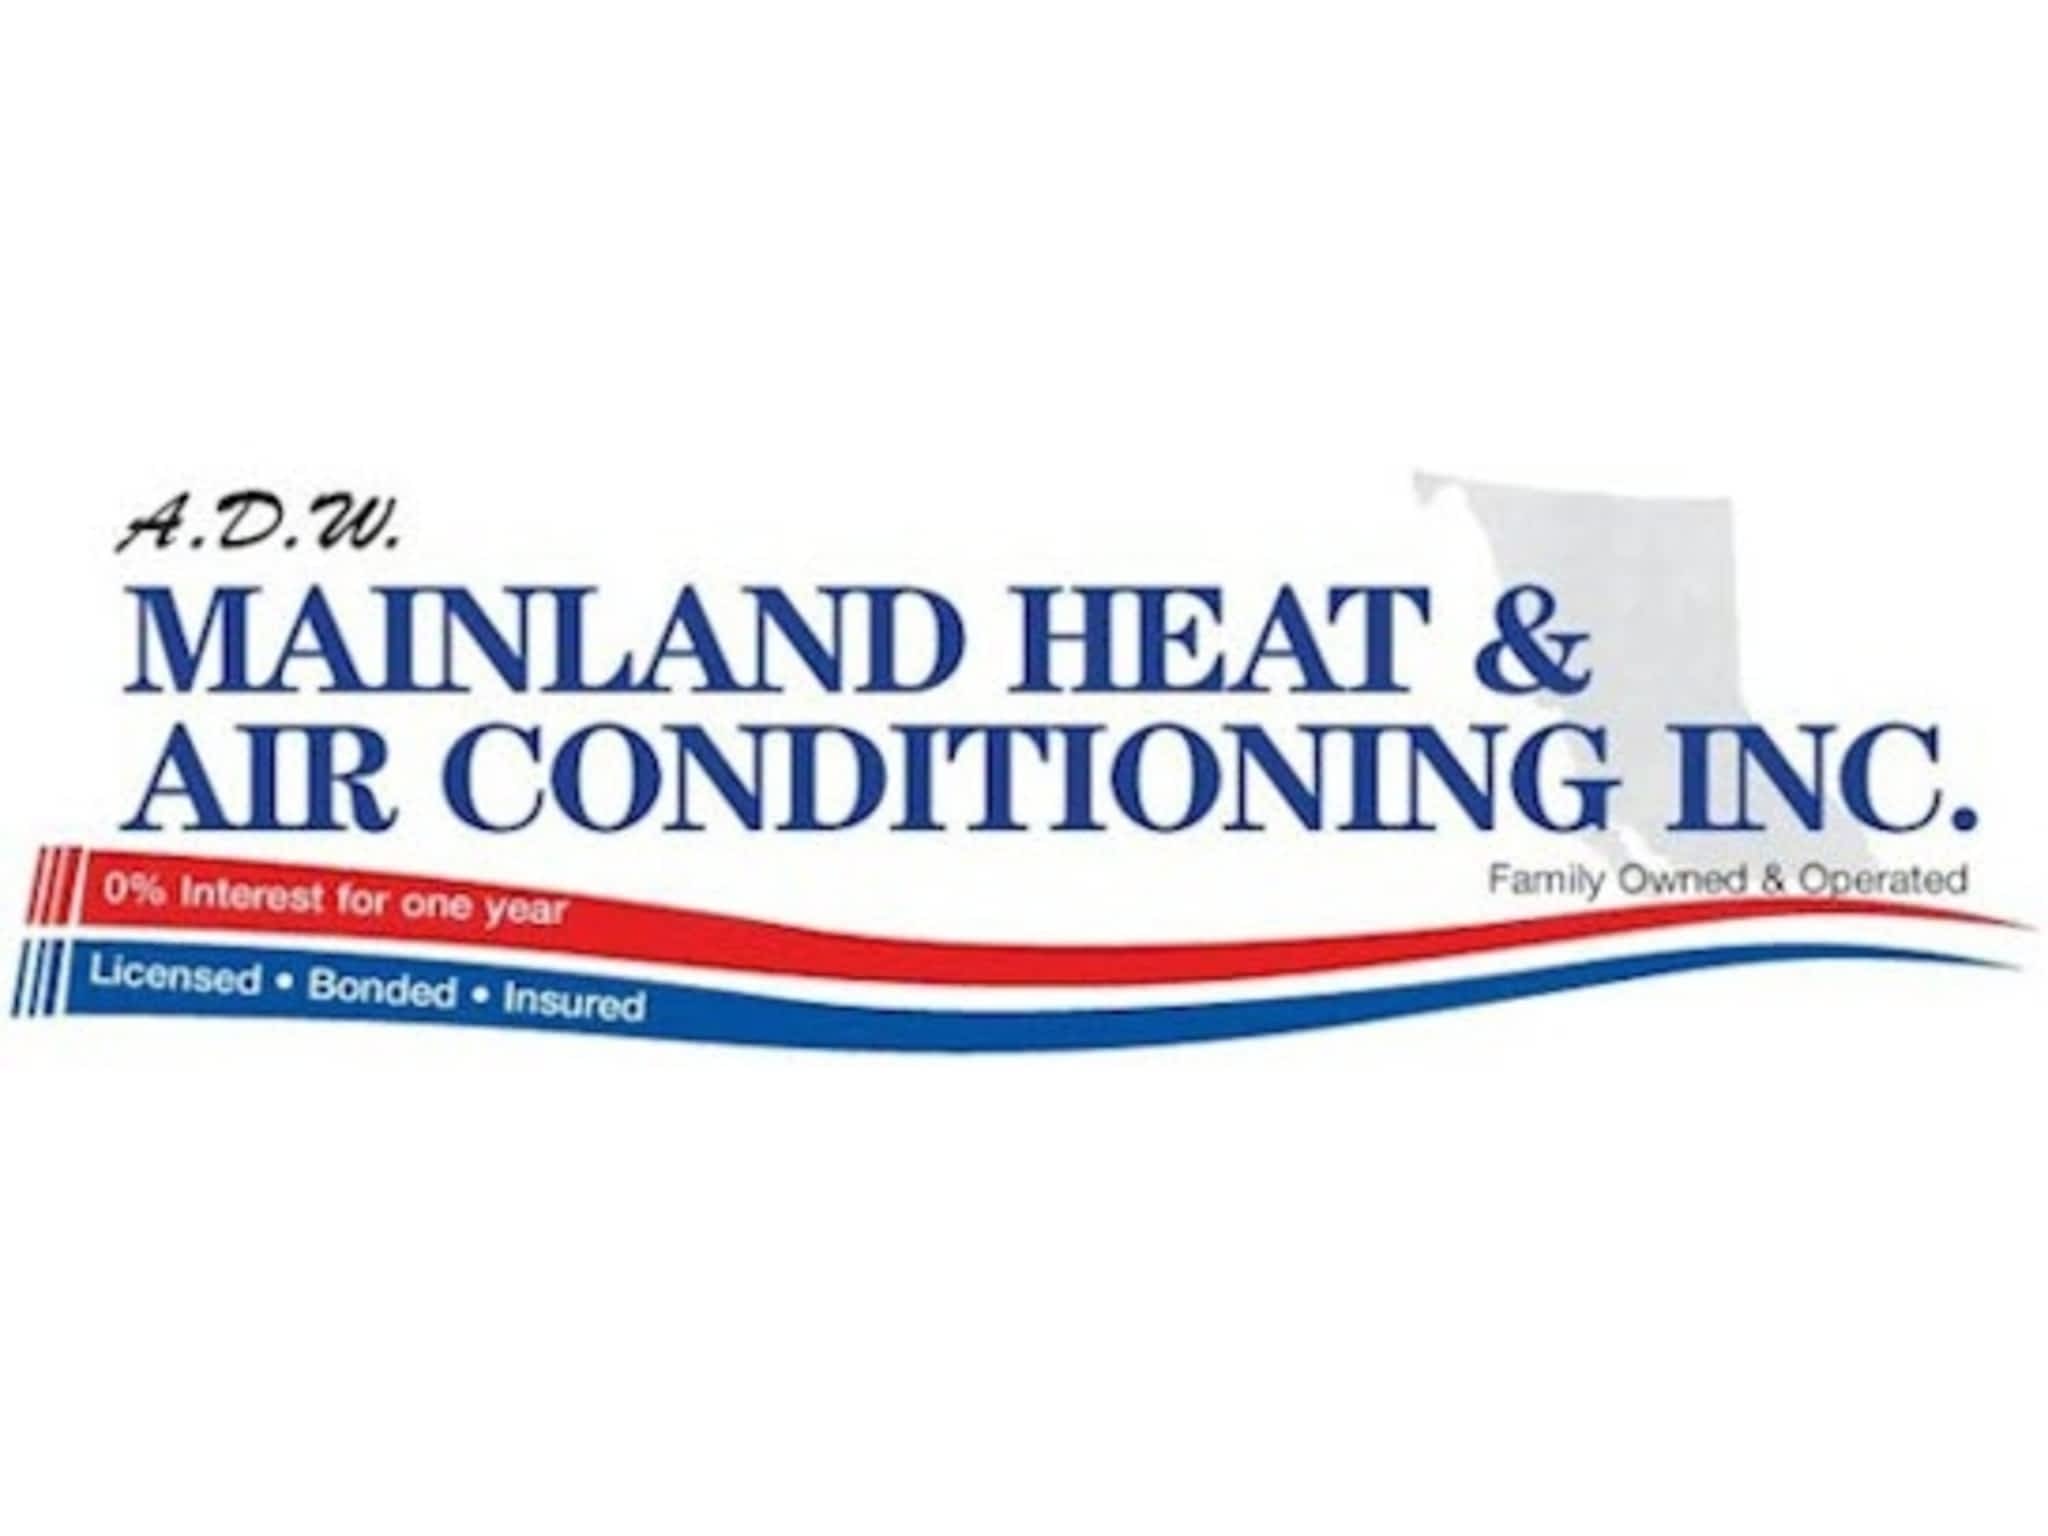 photo ADW Mainland Heat and Air Conditioning